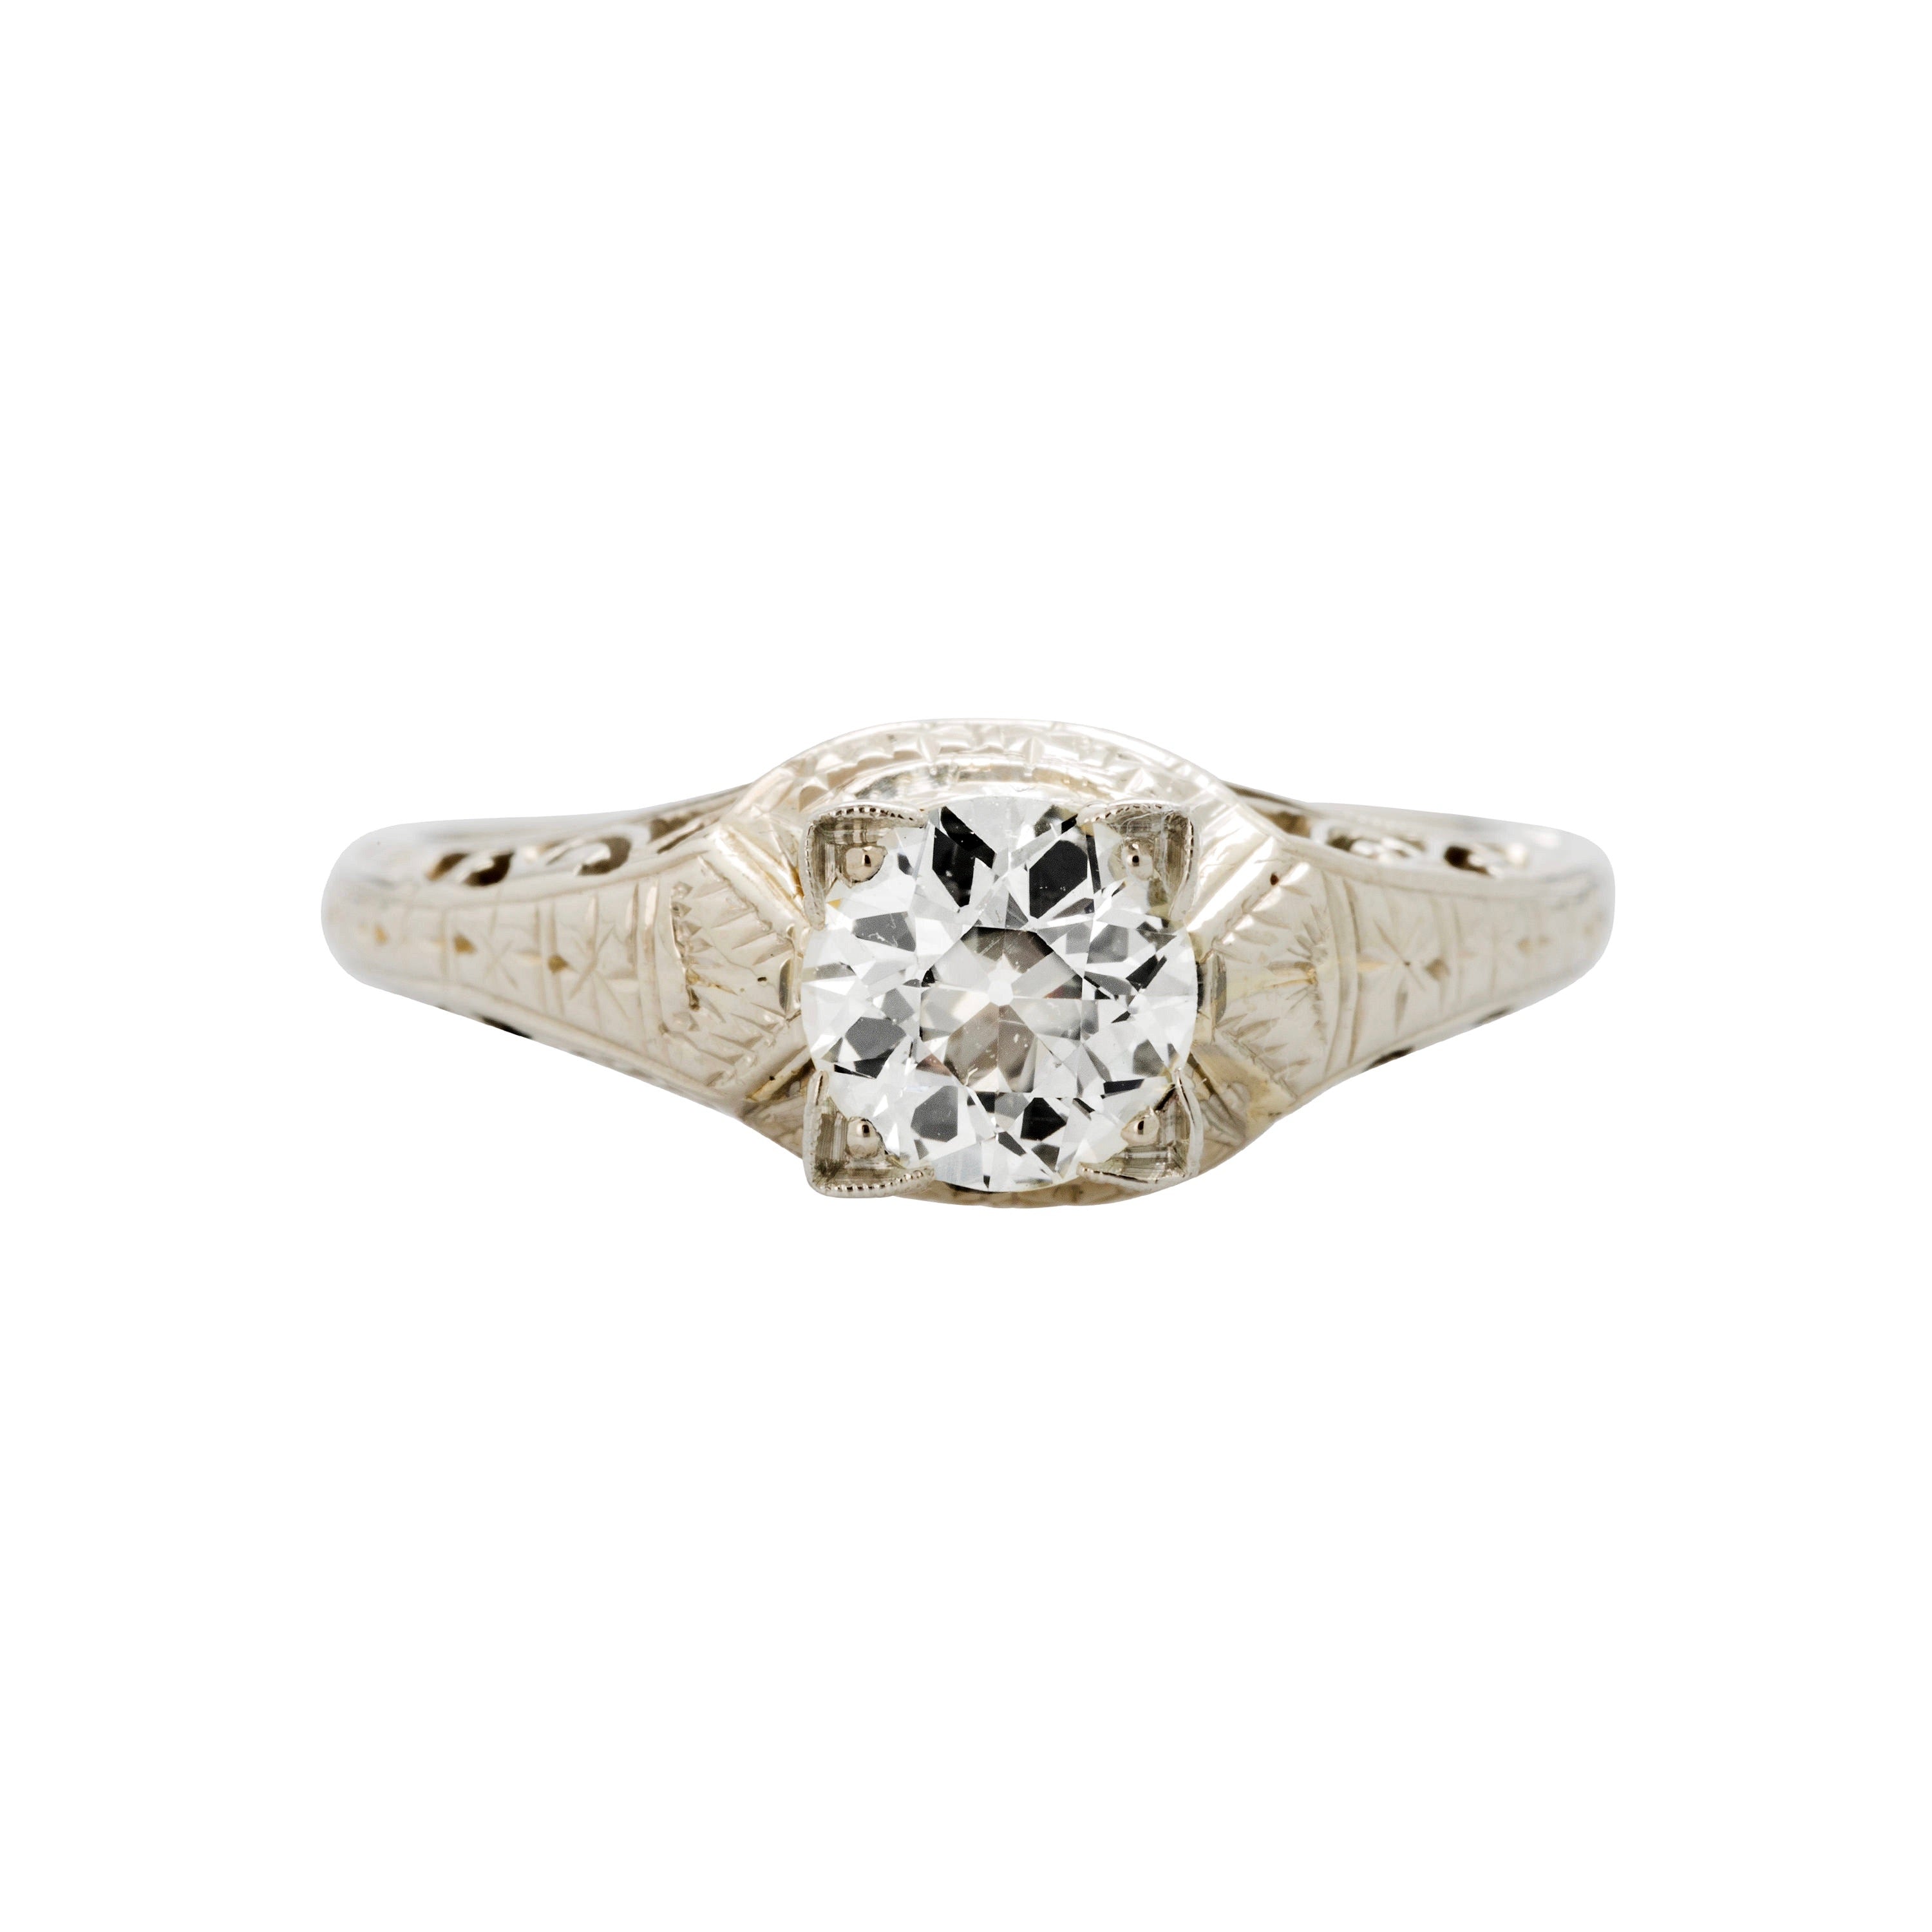 A pretty 18k white gold and diamond authentic Art Deco engagement ring